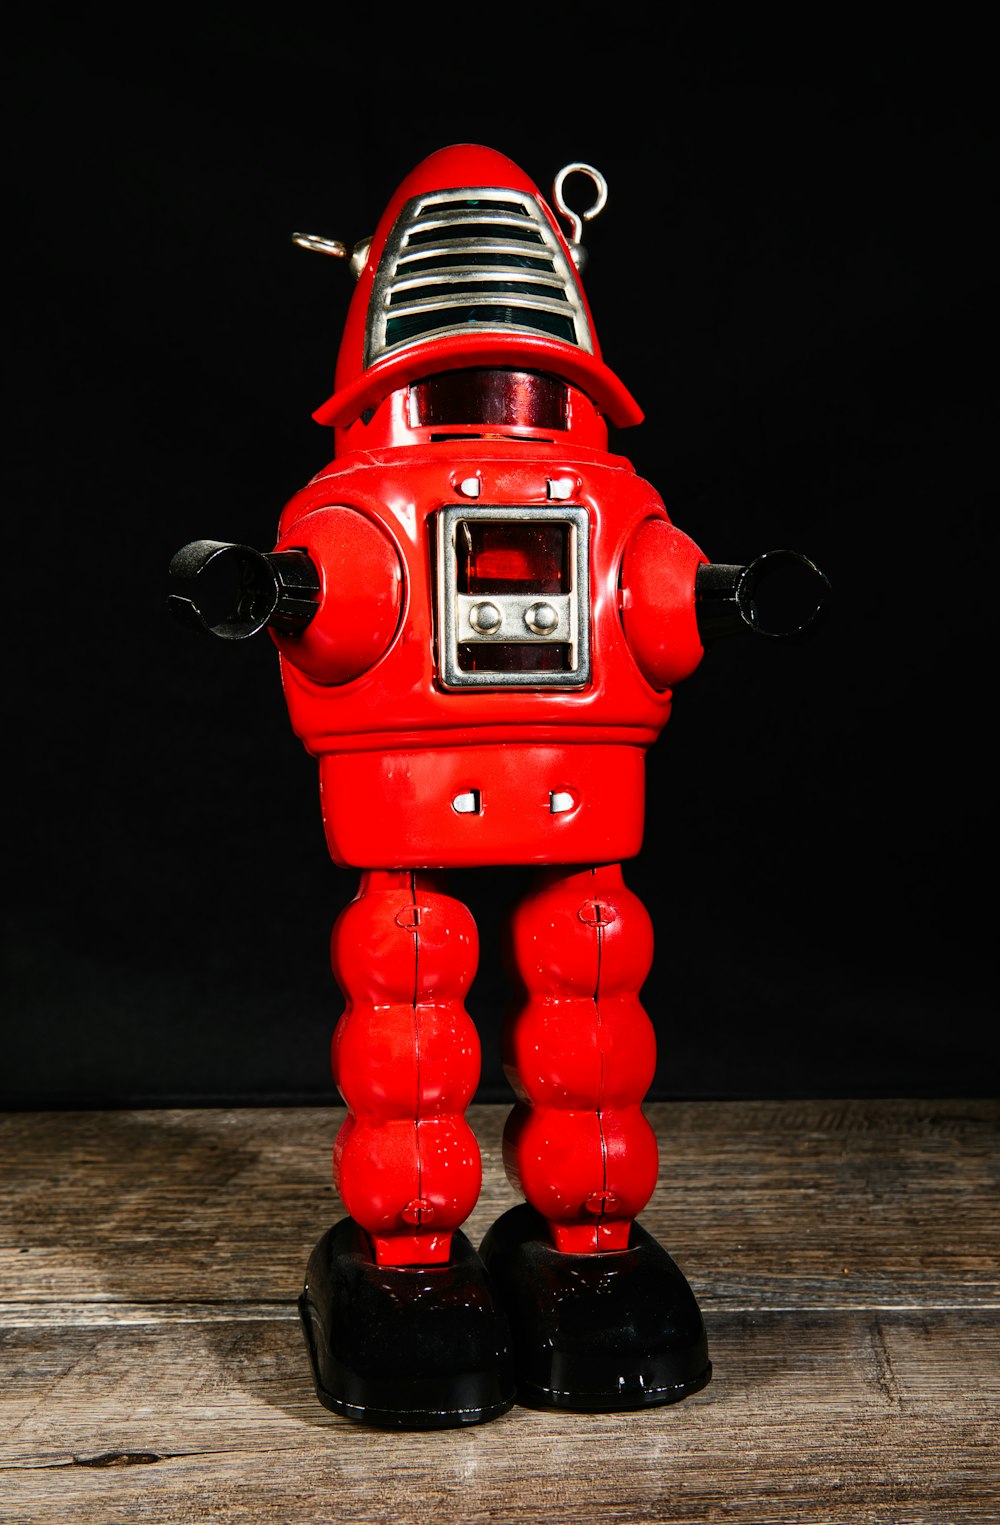 a red toy robot standing on top of a wooden floor